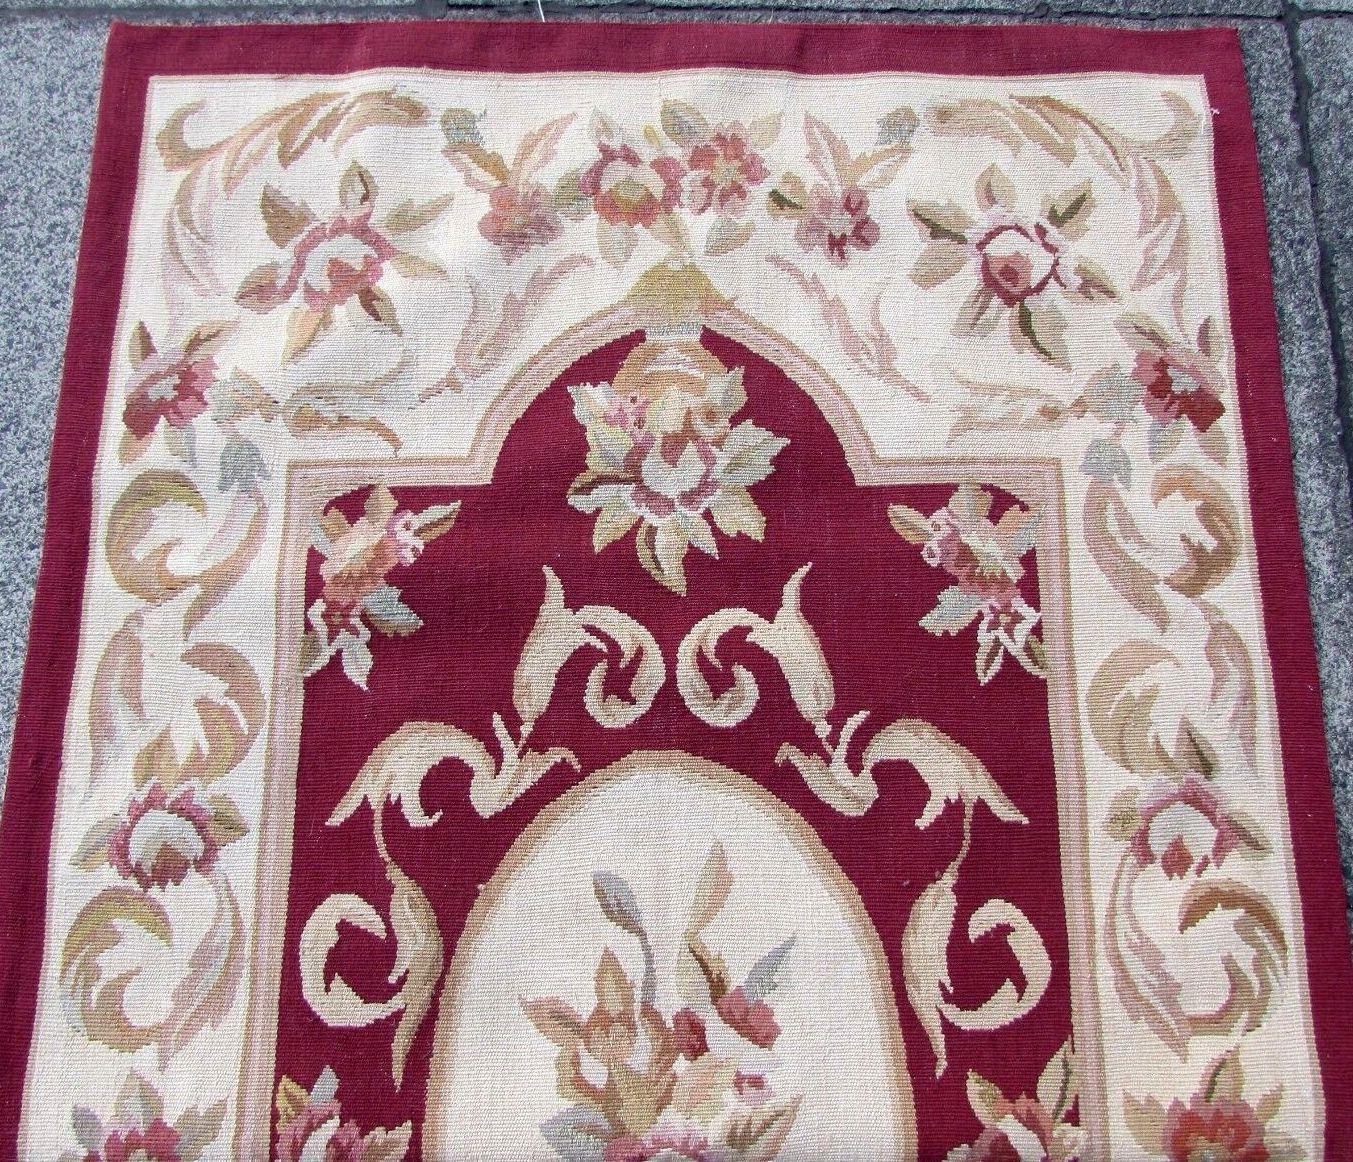 Handmade vintage classic French Aubusson rug. It is from the end of 20th century in original good condition.

-Condition: Original good,

-Circa 1980s,

-Size: 2.6' x 4.7' (80cm x 145cm),

-Material: Wool,

-Country of origin: